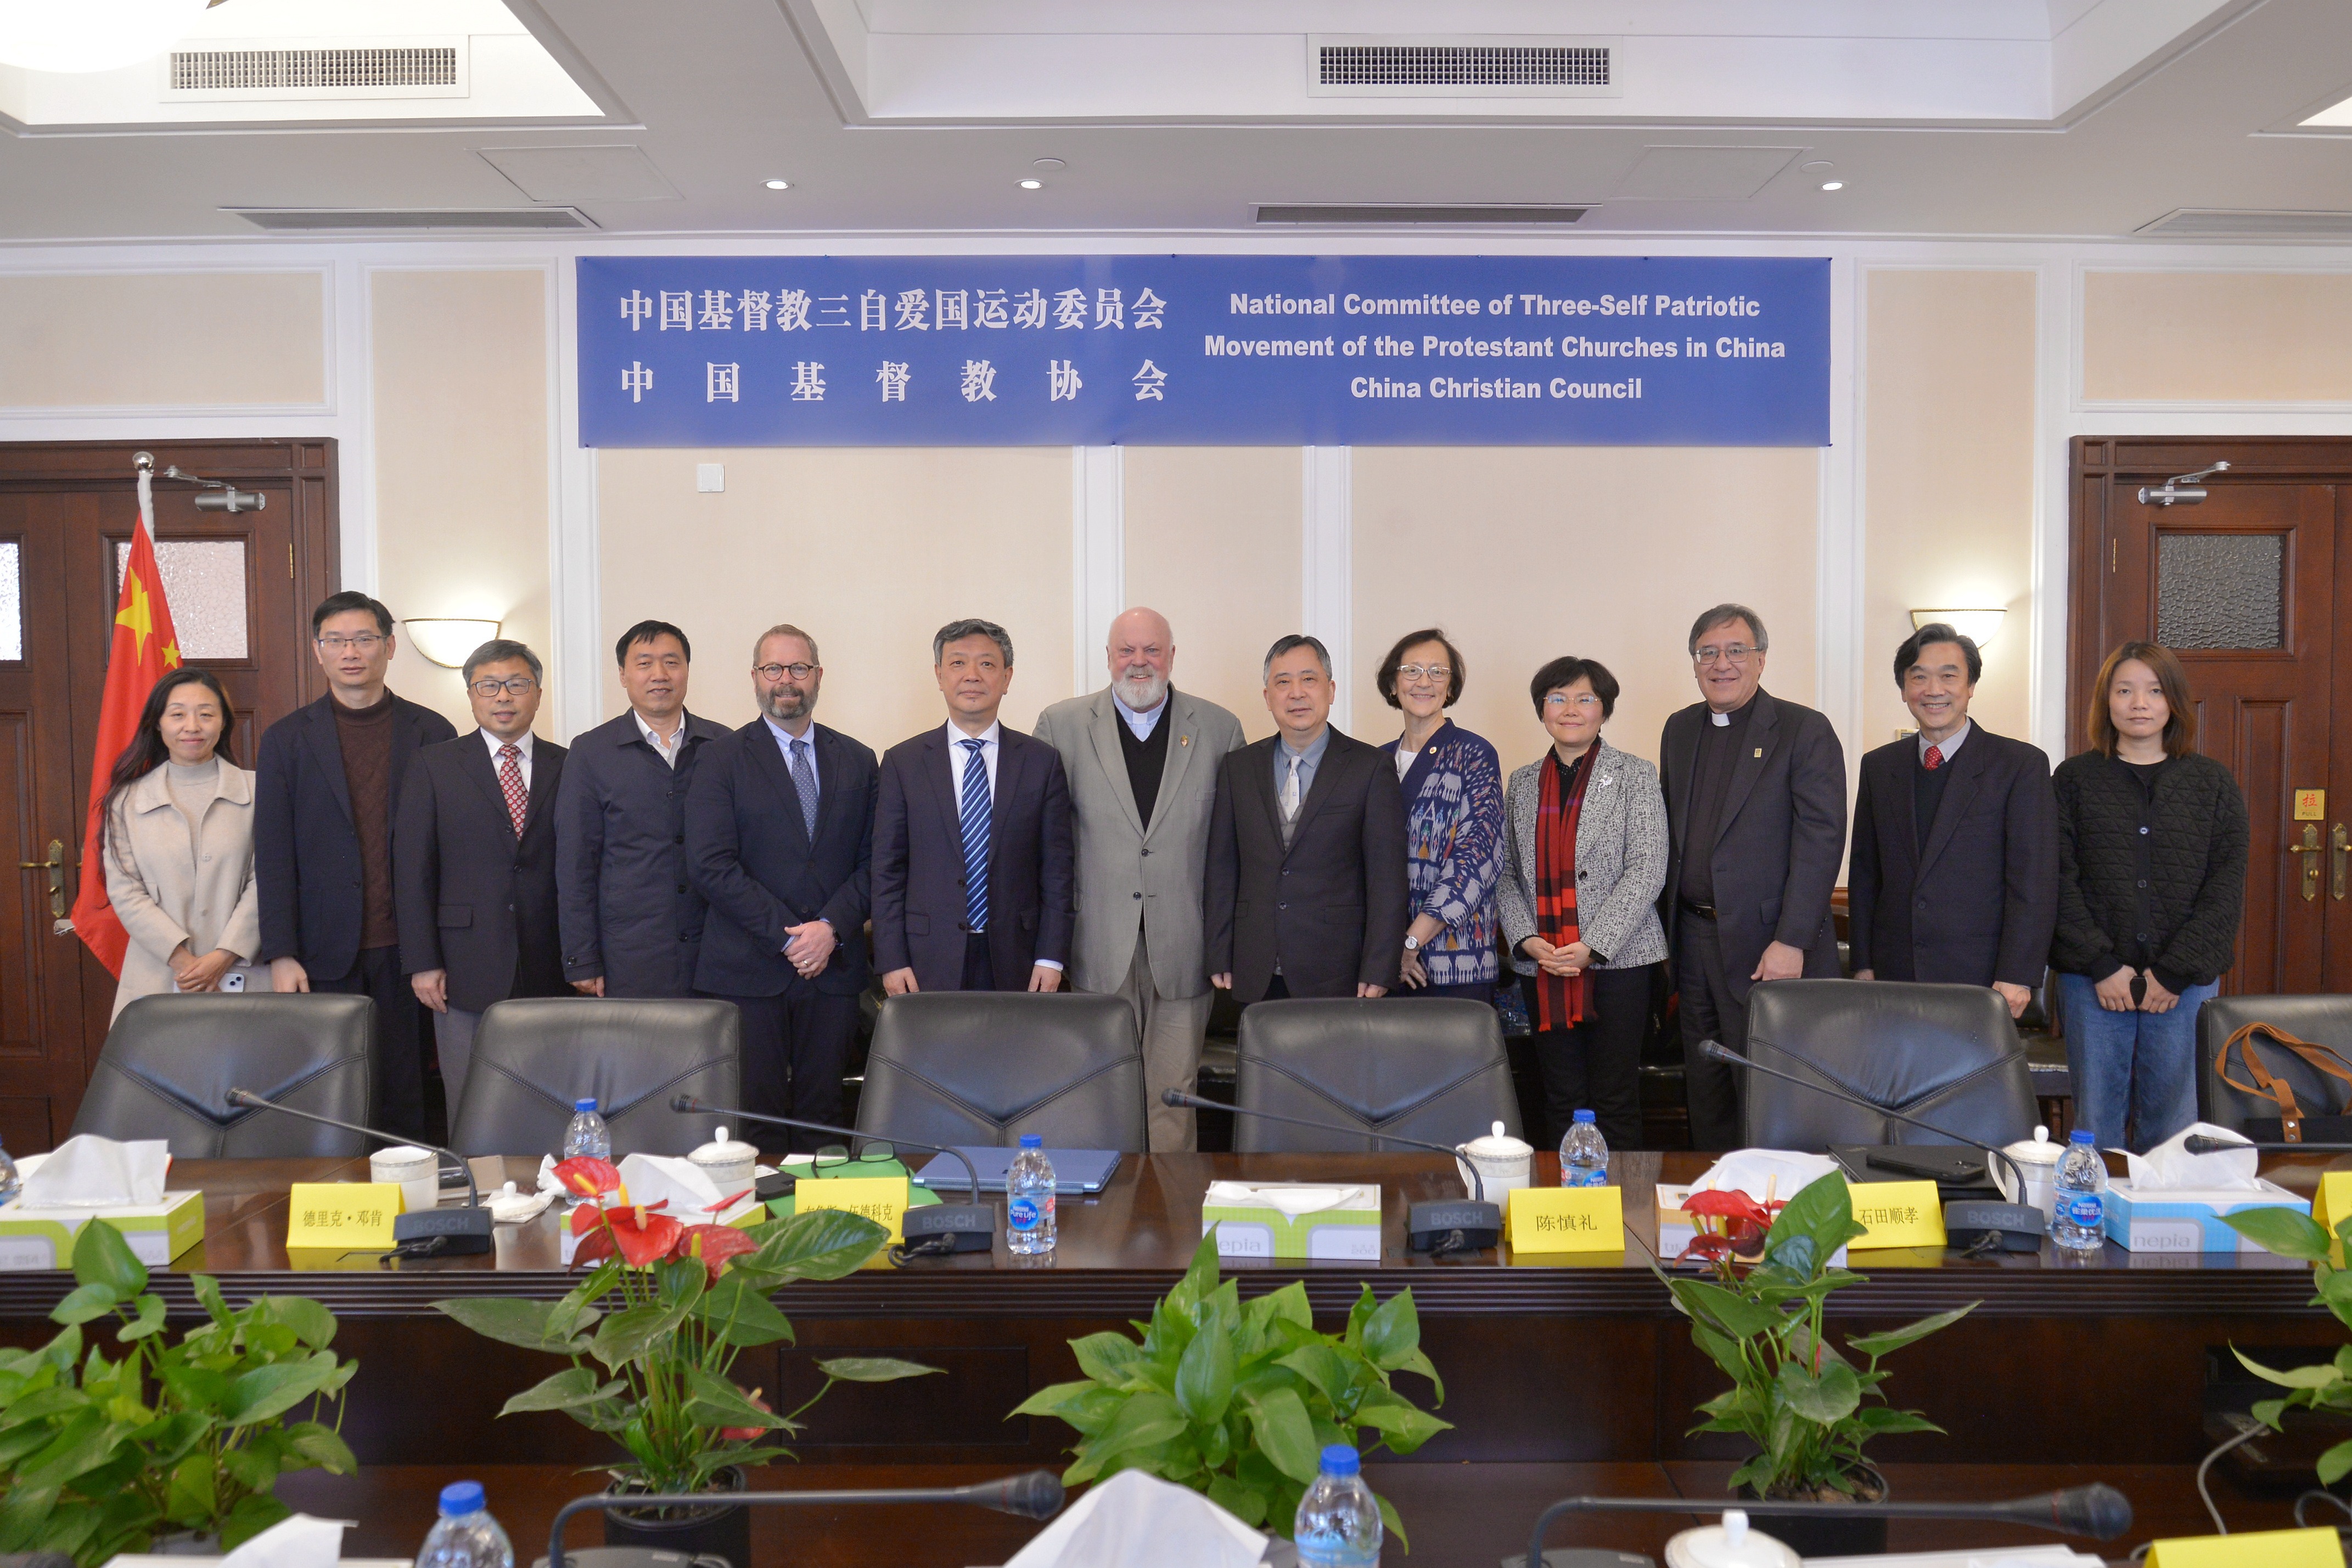 Chair of Asian Pacific Forum Visits CCC&TSPM